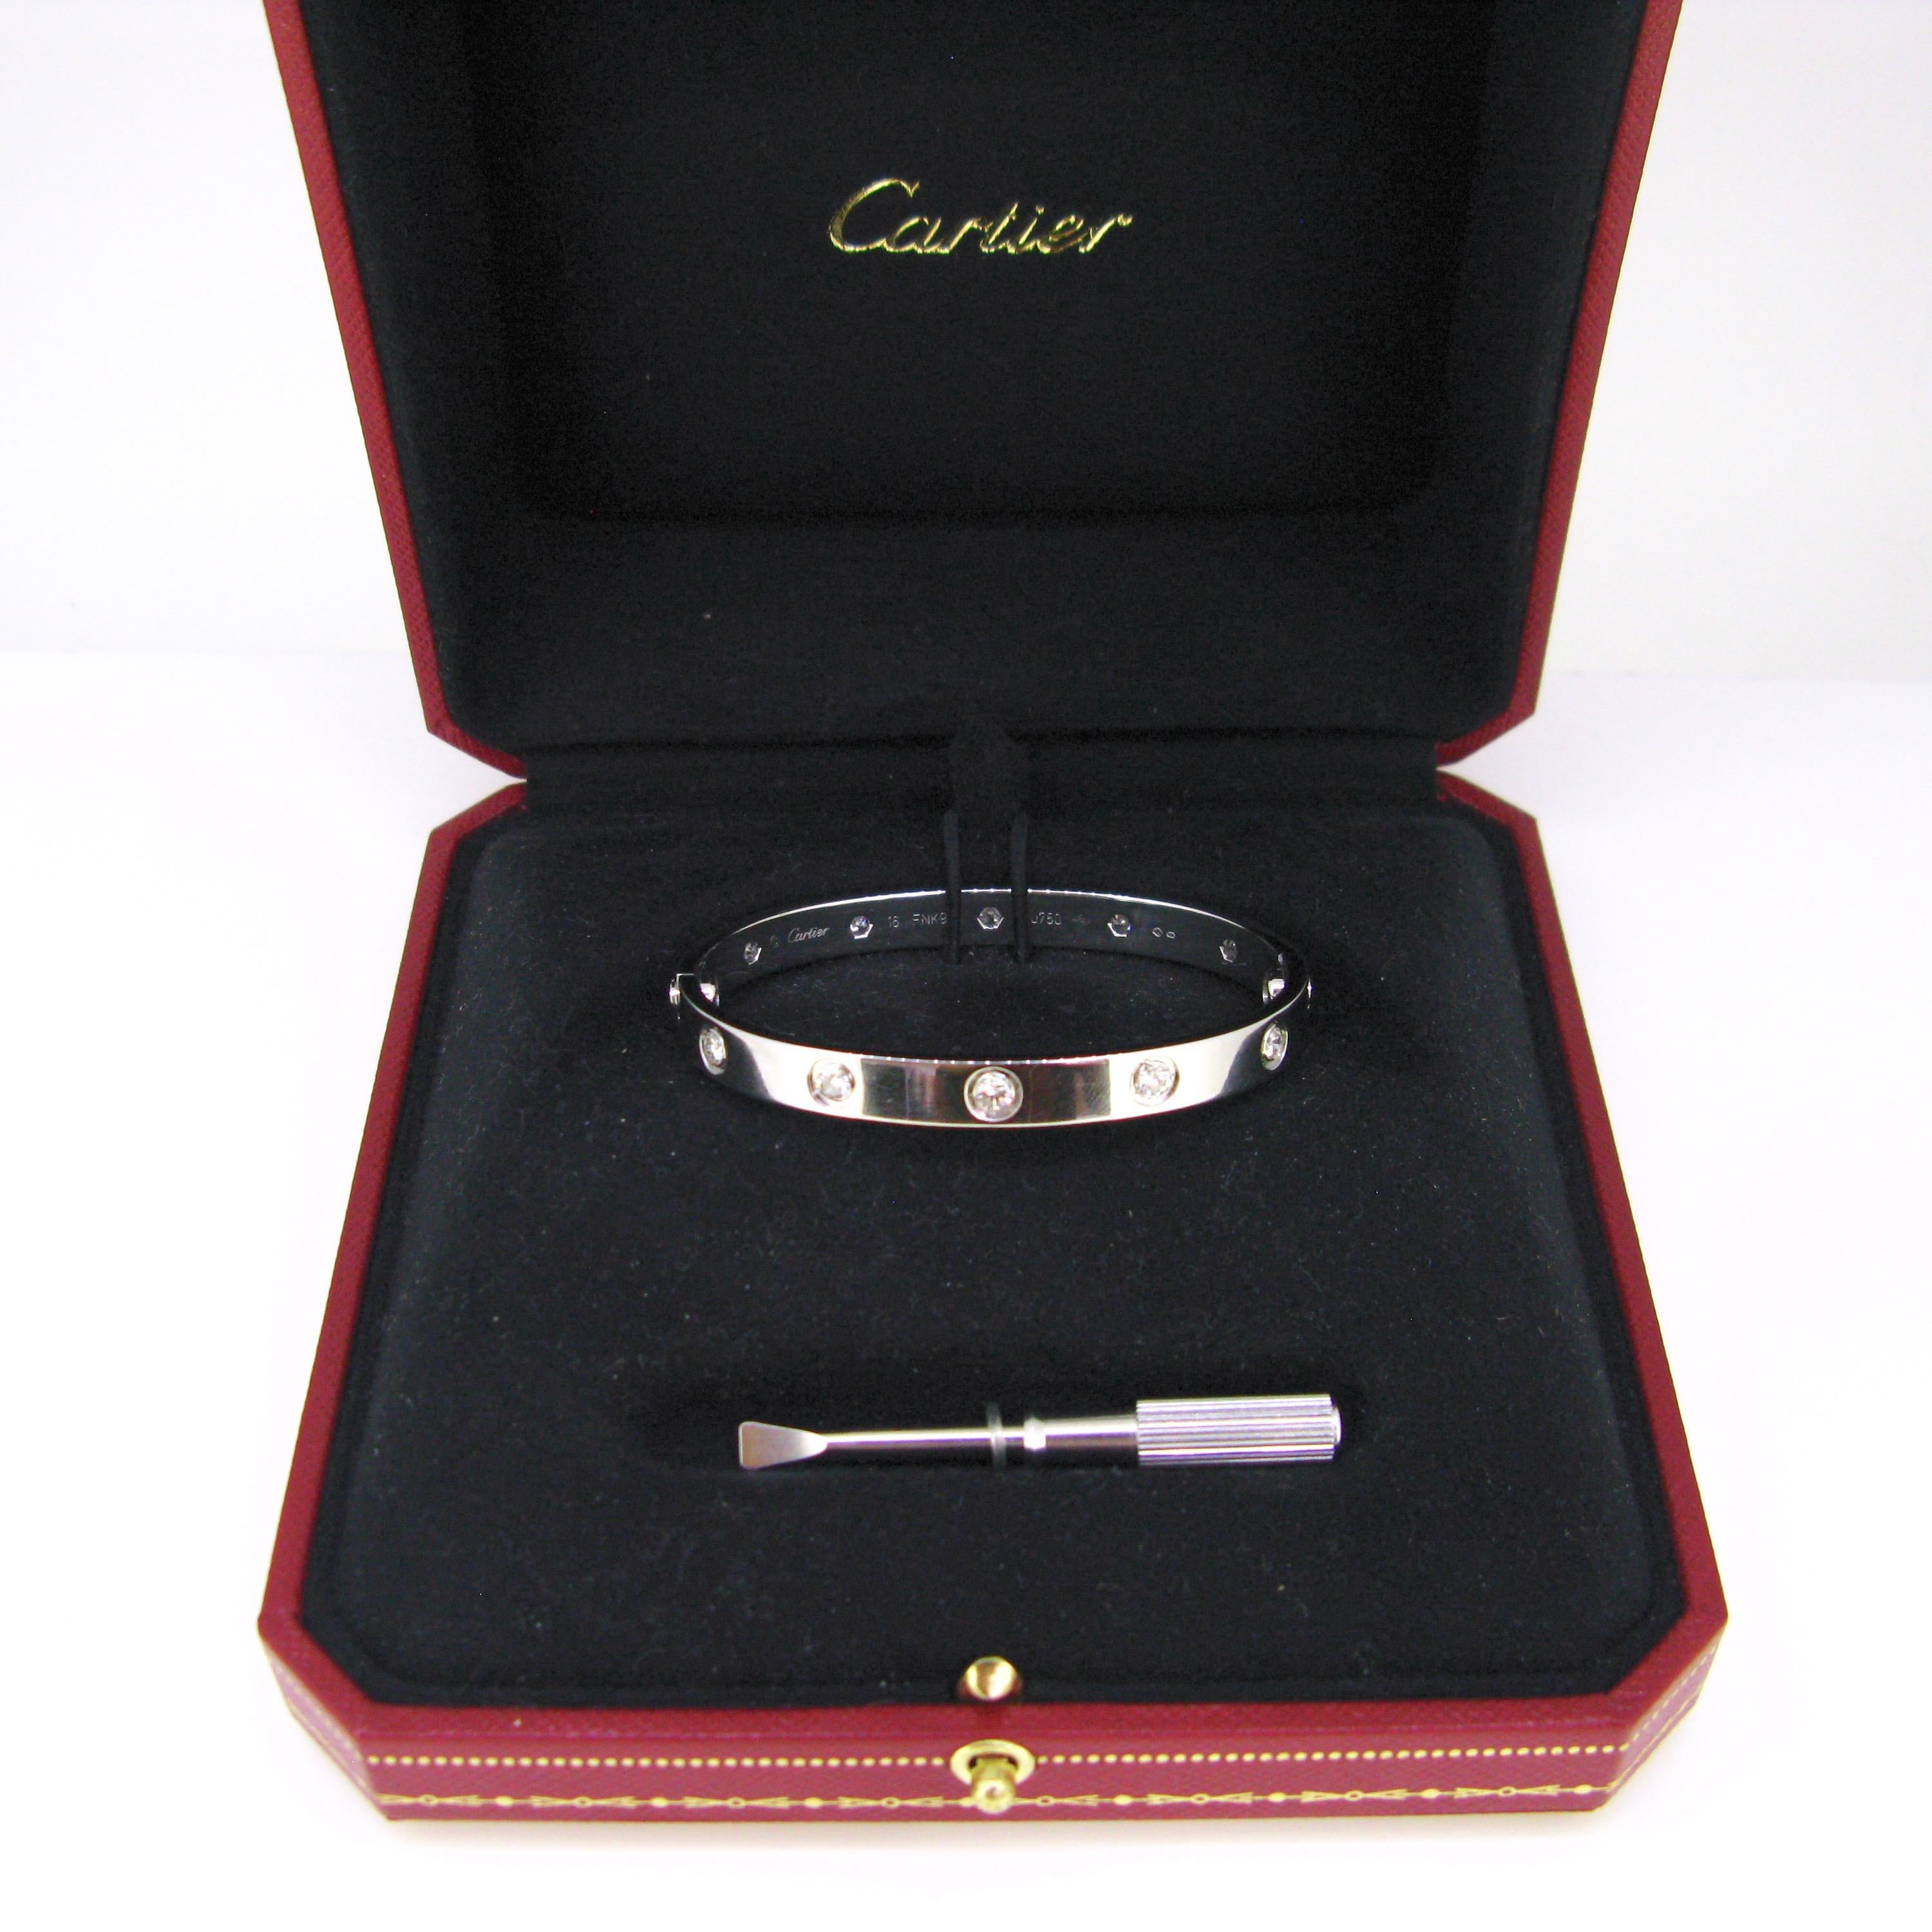 This beautiful Cartier Love Bangle is a size 16. It features 10 diamonds for a total carat weight of 1ct. It is made in 18kt white gold, signed Cartier and numbered FNK946. It comes with its original Cartier box. It is in great